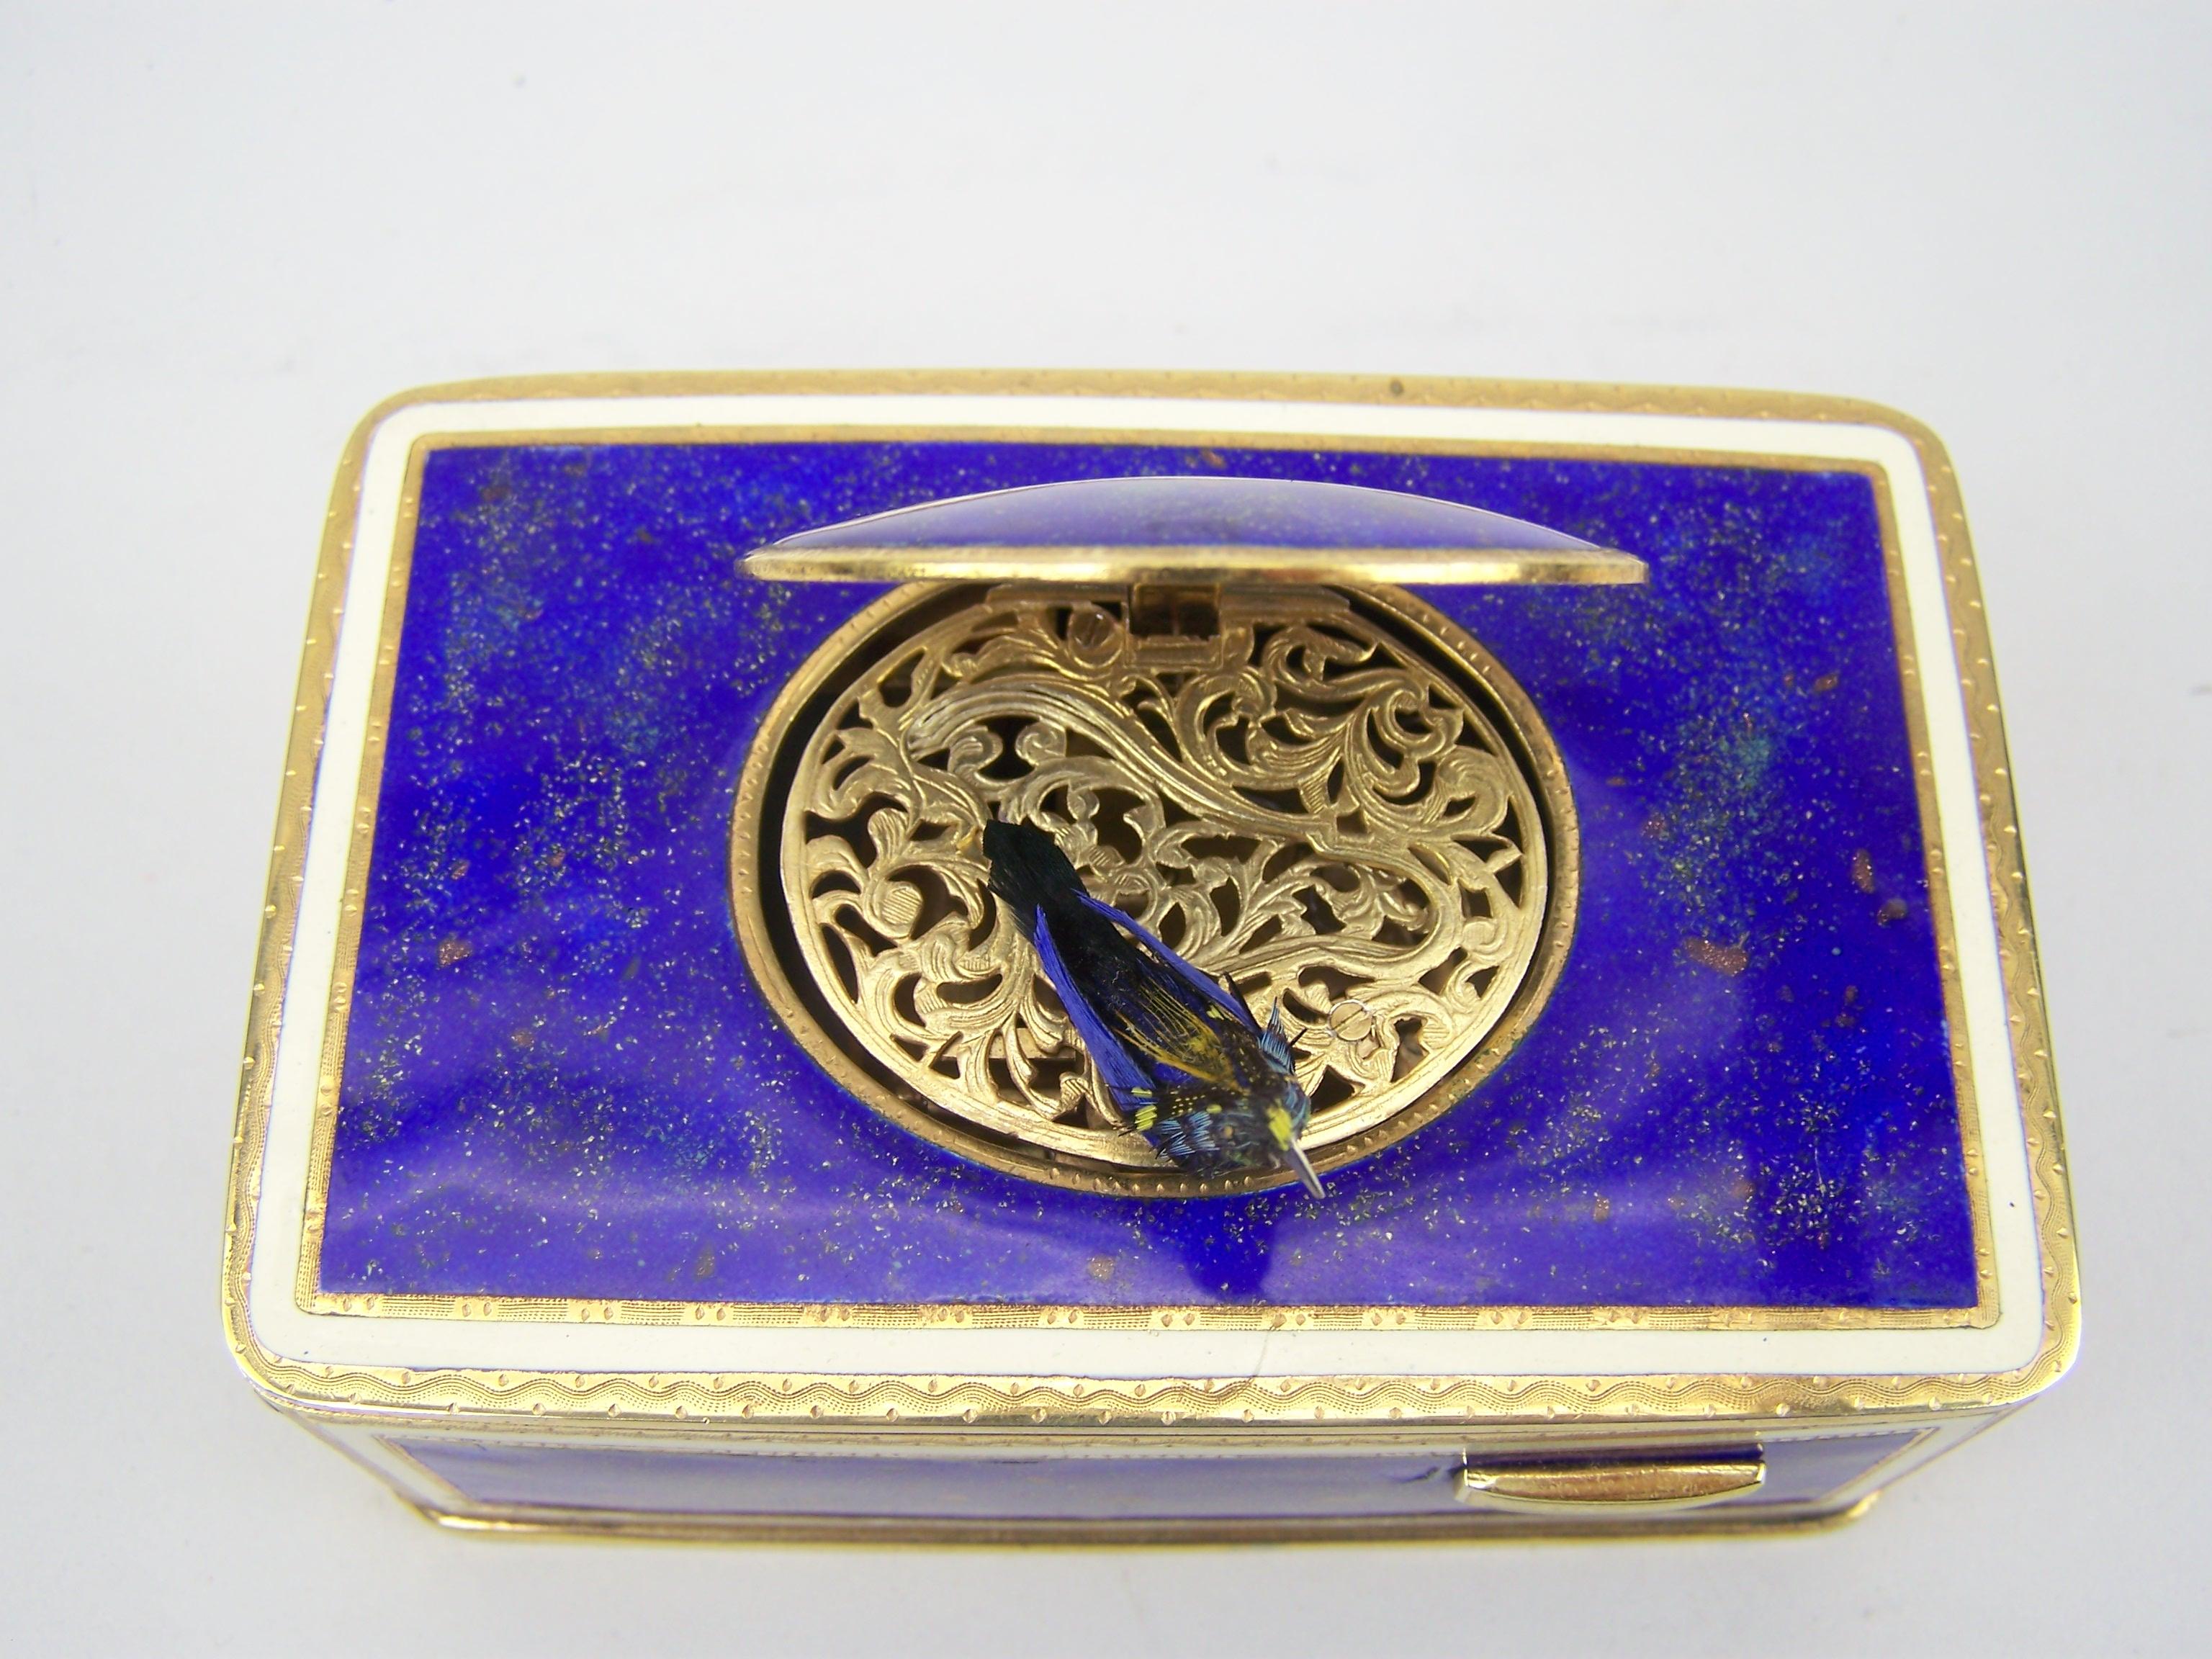 Singing bird box by K Griesbaum in guilded case and blue-goldflaked enamel 8